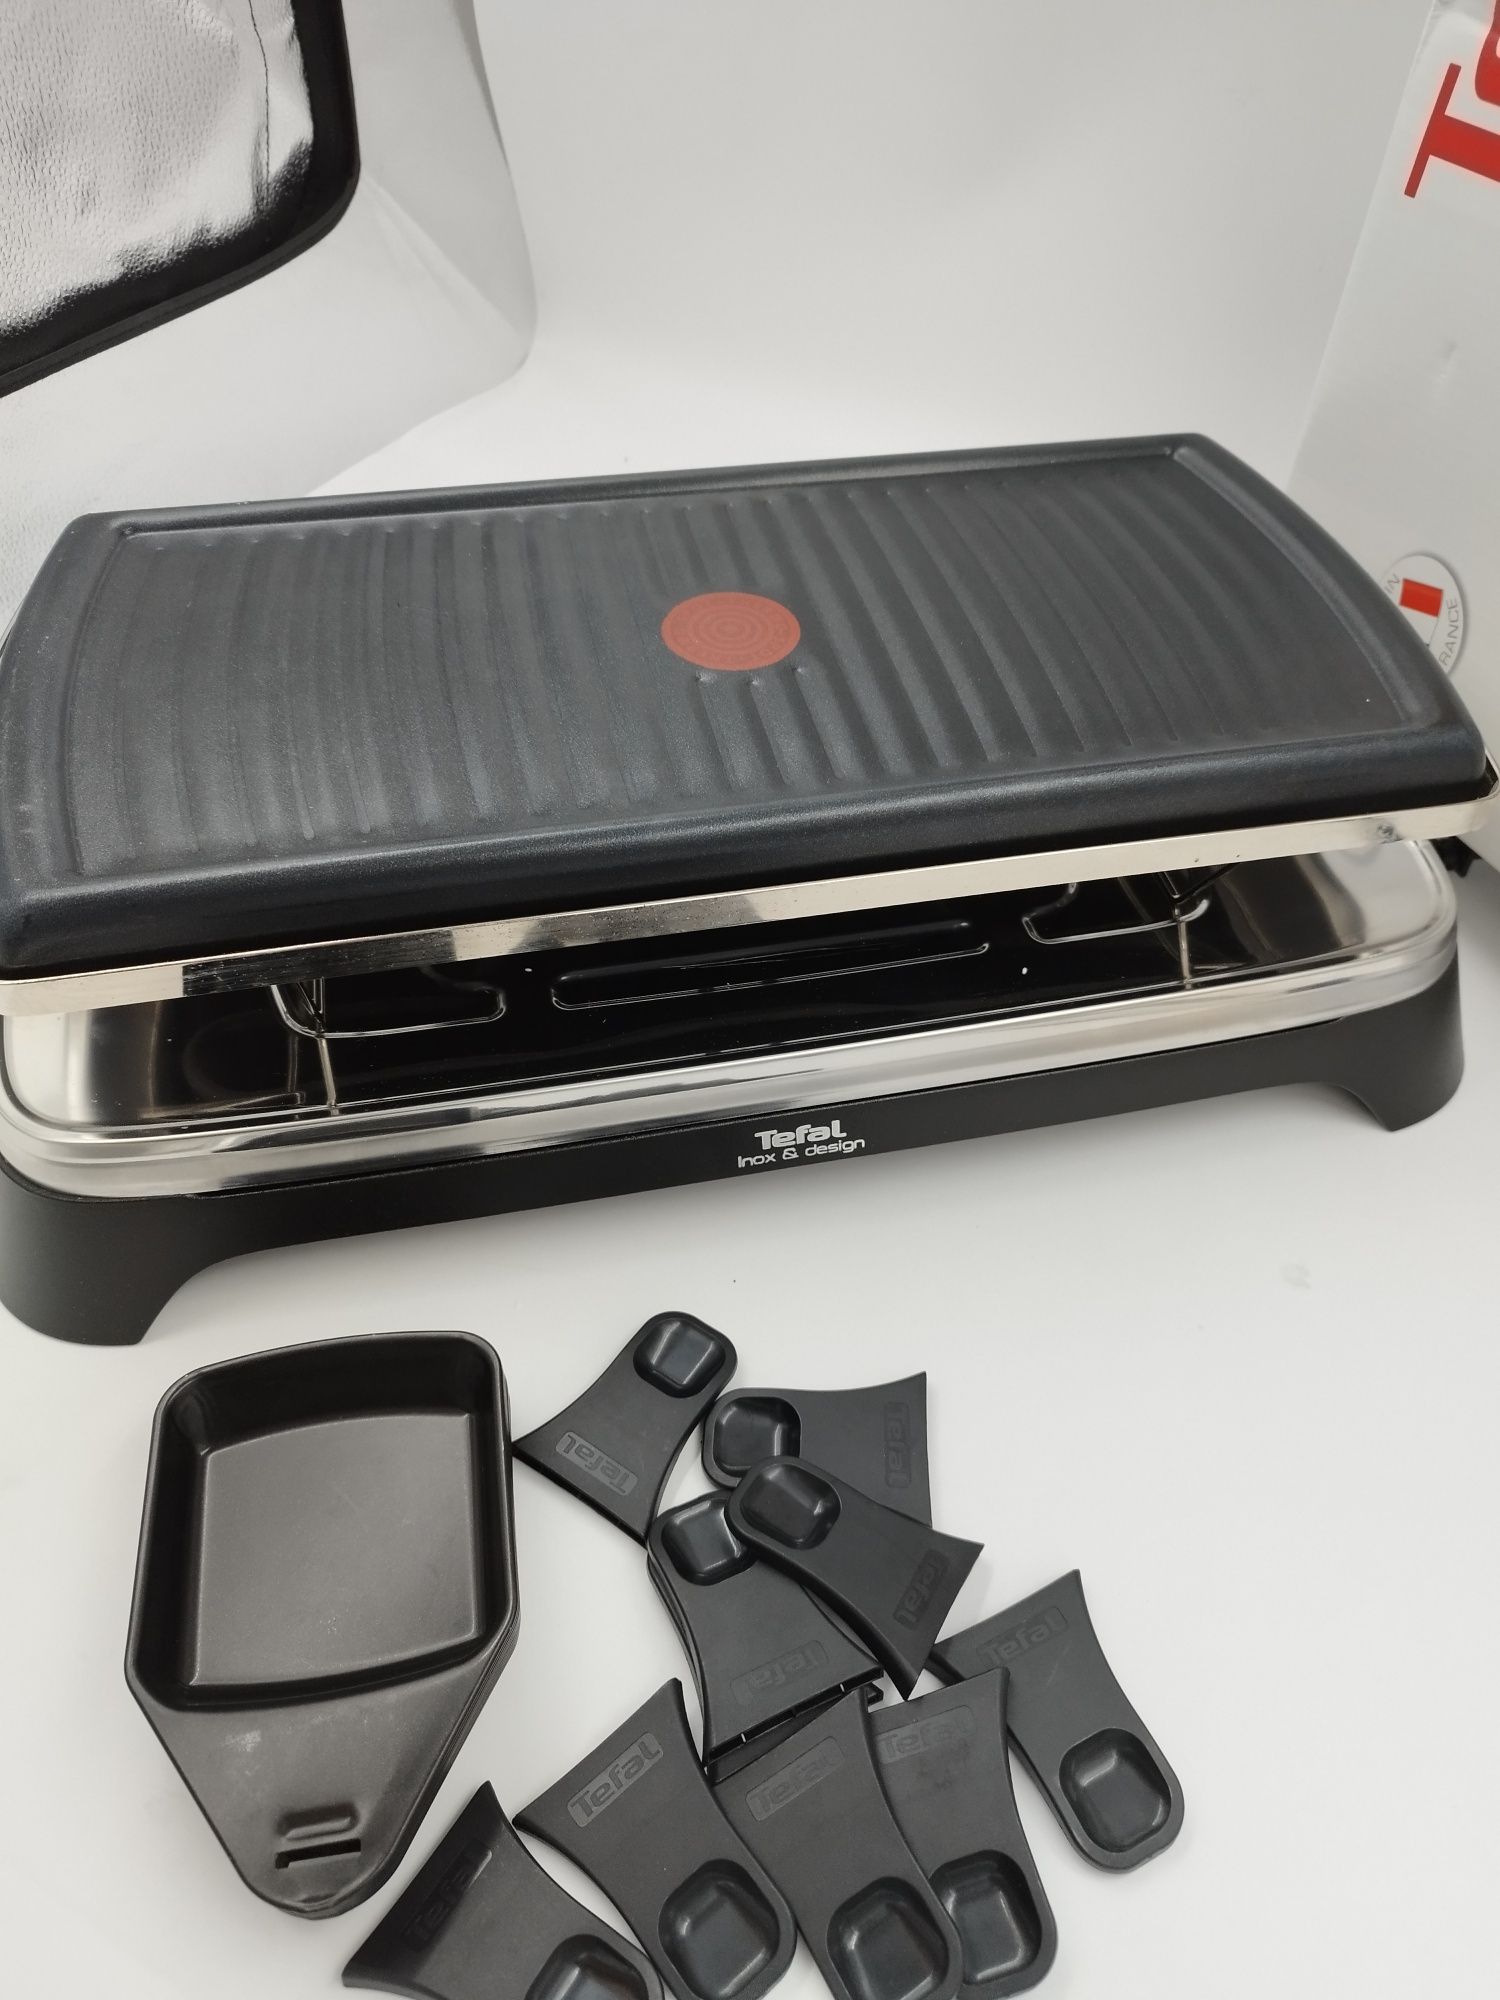 Tefal grill raclette re458812